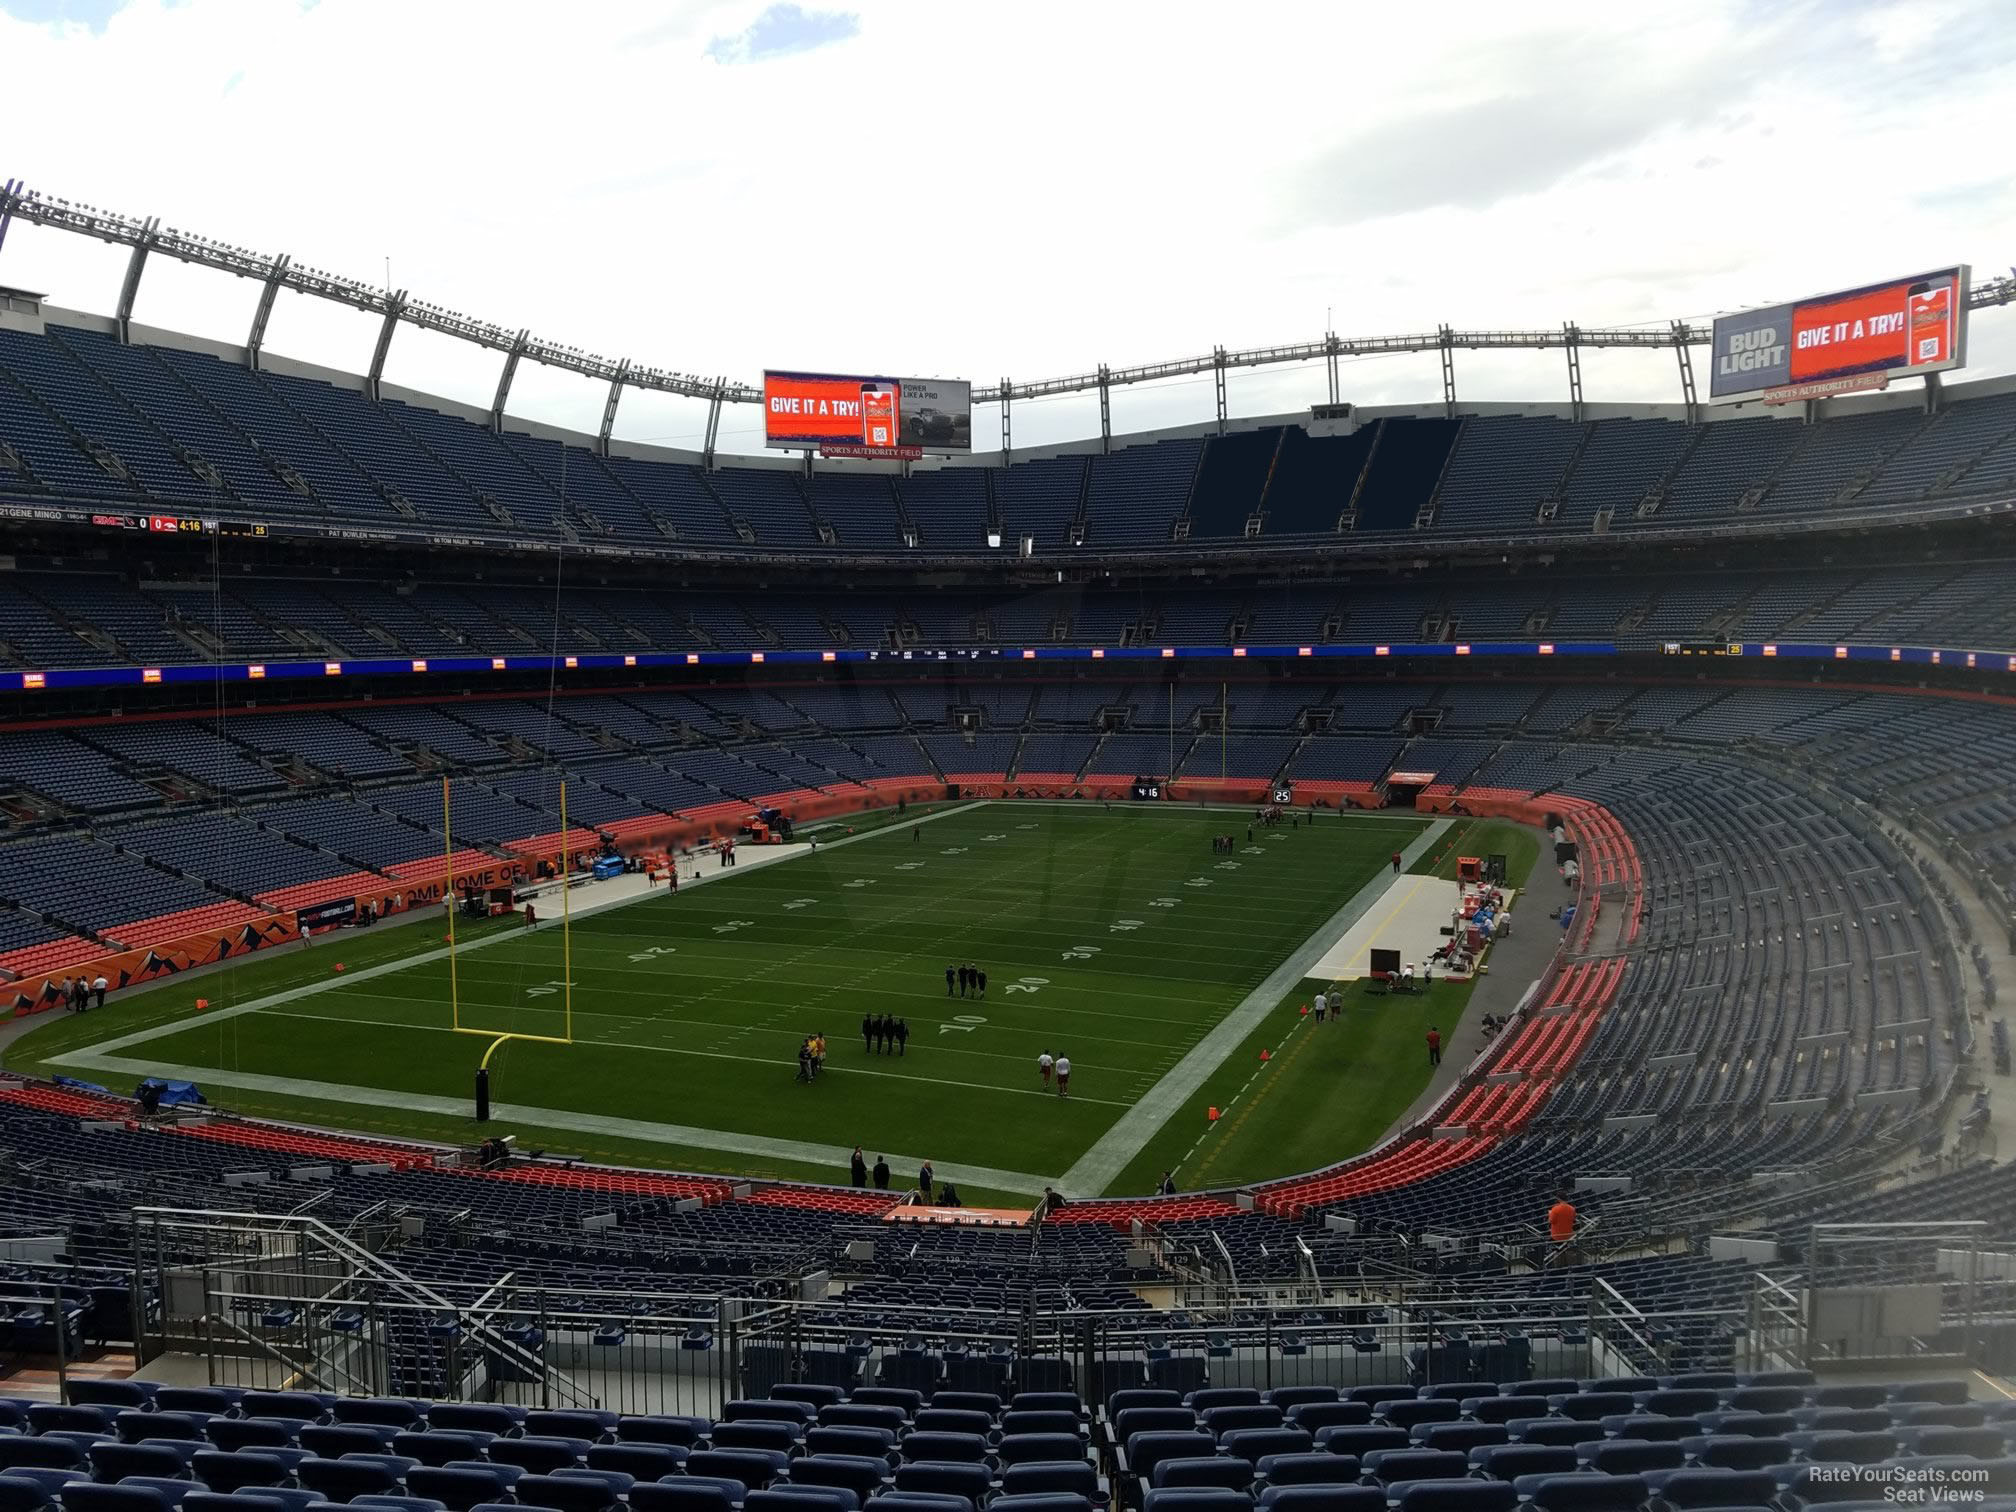 section 229, row 16 seat view  - empower field (at mile high)